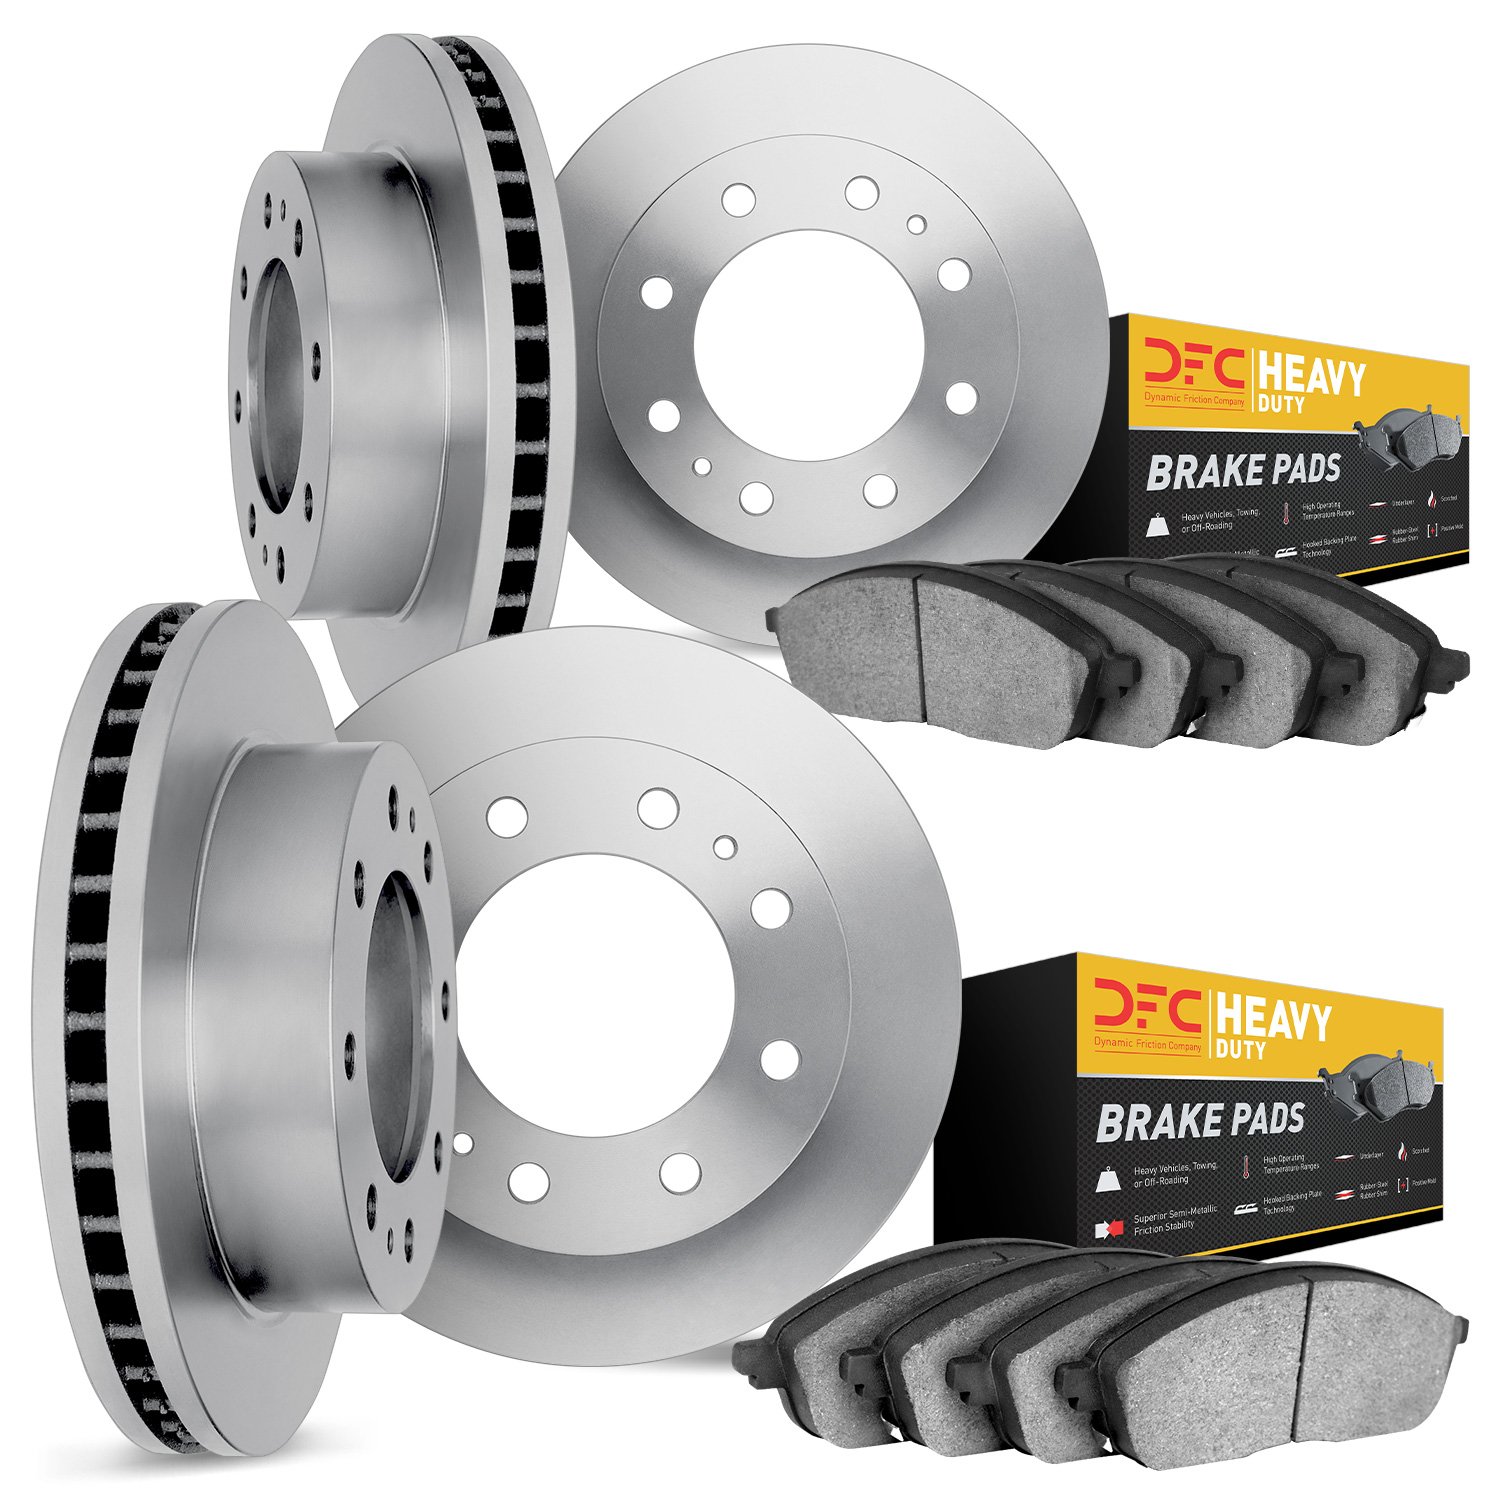 6204-48418 Brake Rotors w/Heavy-Duty Brake Pads Kit, 2003-2017 GM, Position: Front and Rear